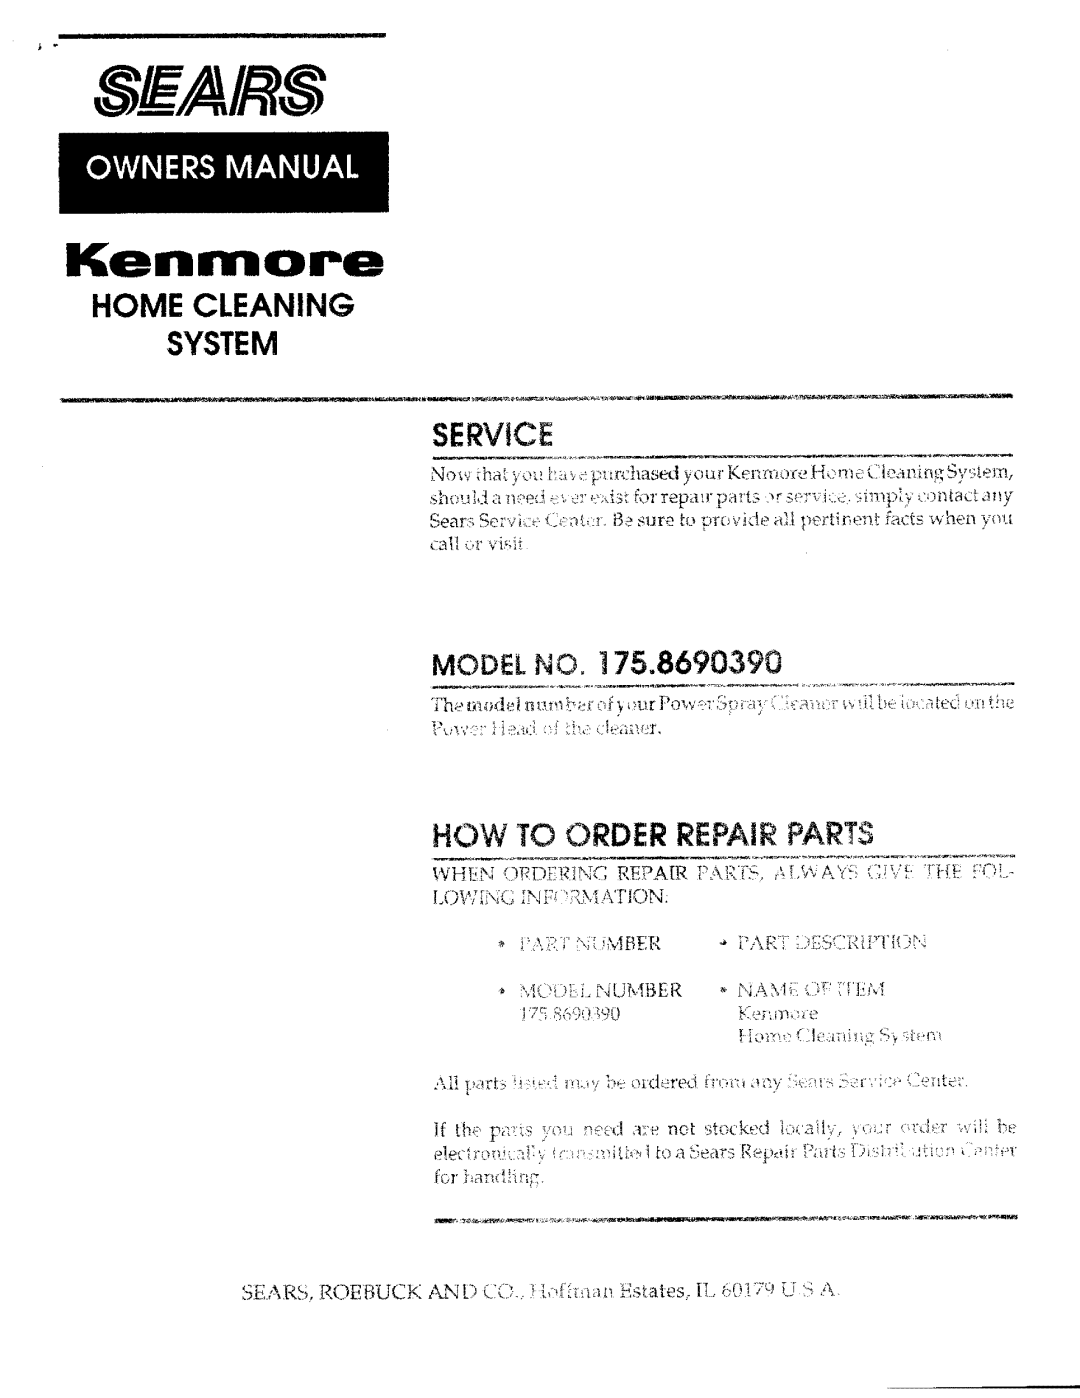 Kenmore 175.869039 manual Kenmore, Service, How To Order Repair Parts, MODI L140, System, Home Cleaning 